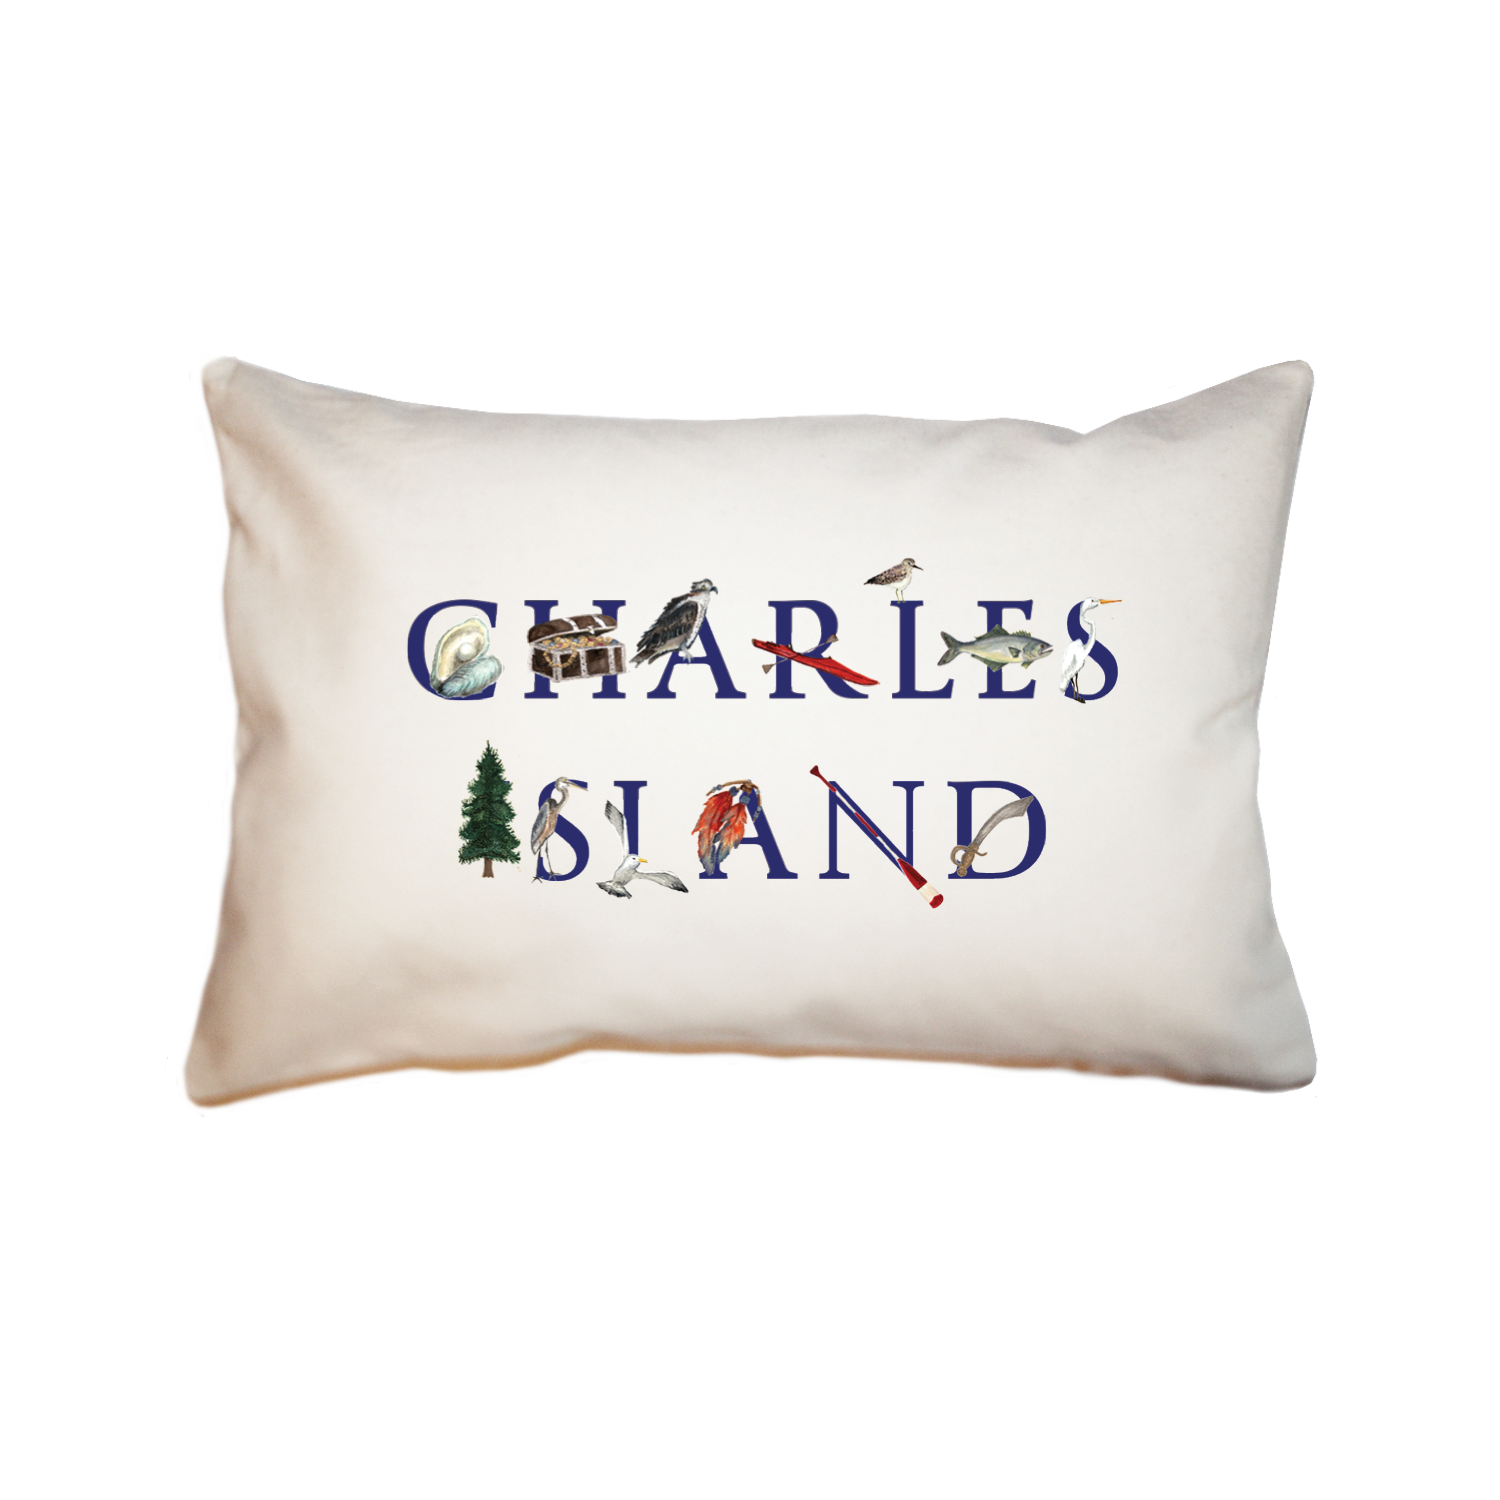 charles island large rectangle pillow